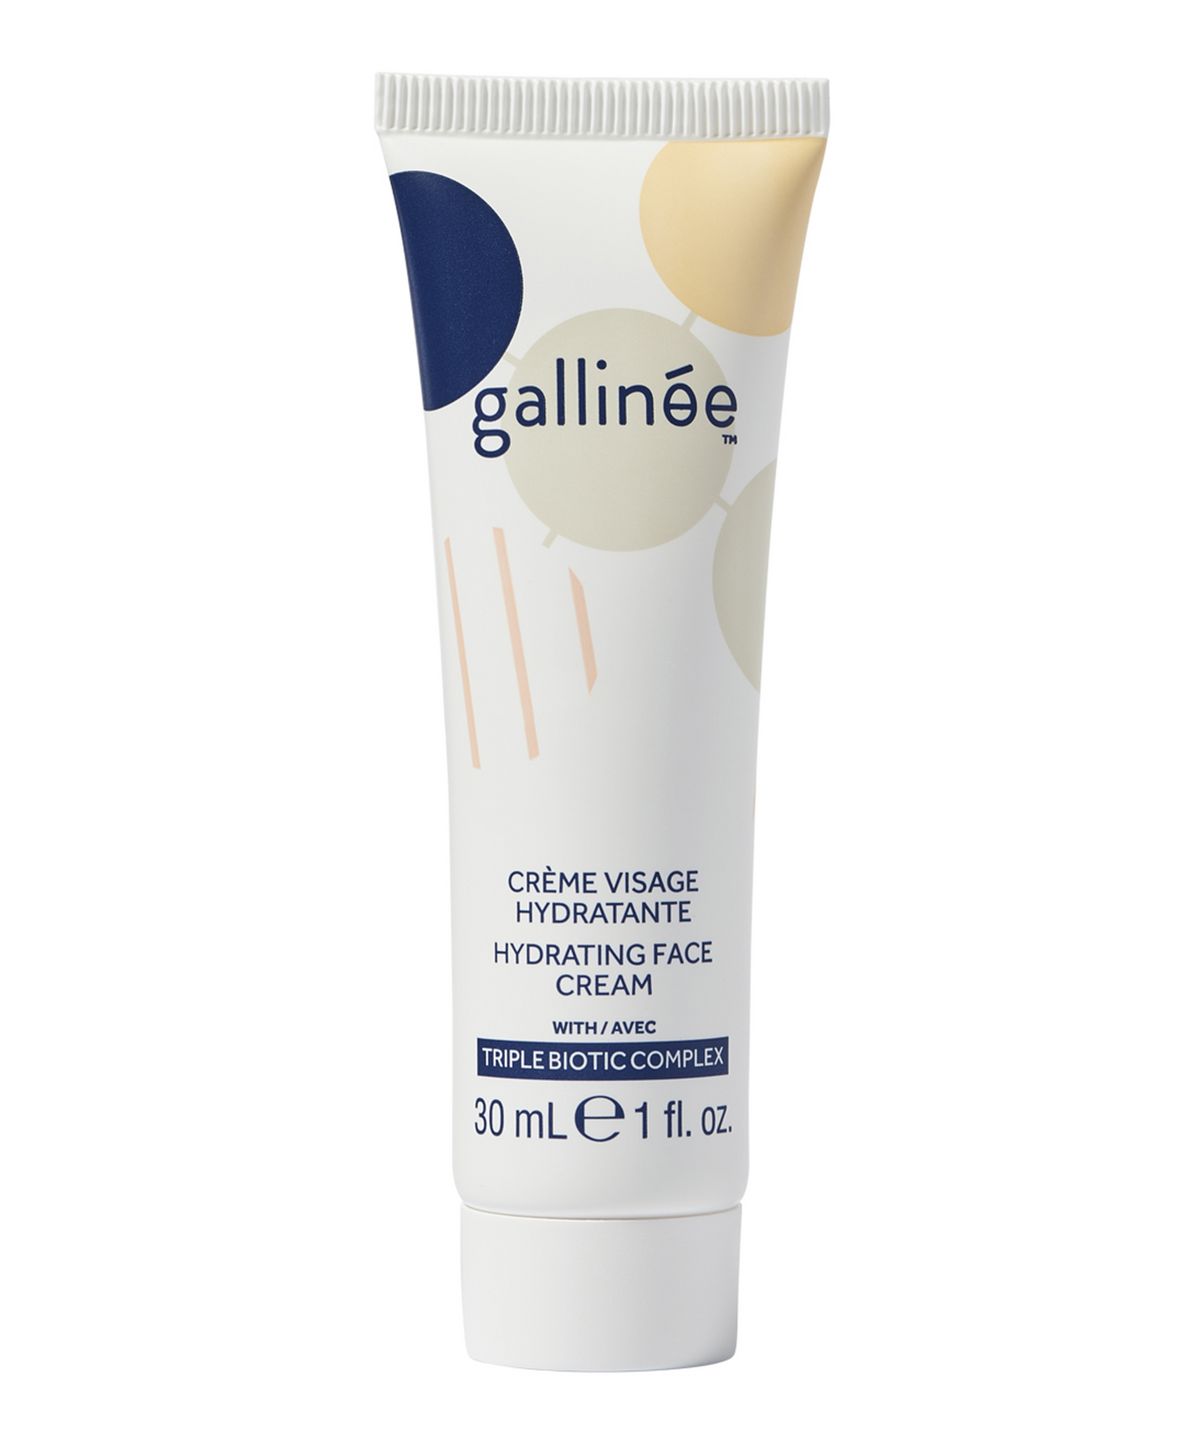 Gallinee Hydrating Face Cream (30ml) in Dubai and all over UAE at Shopey